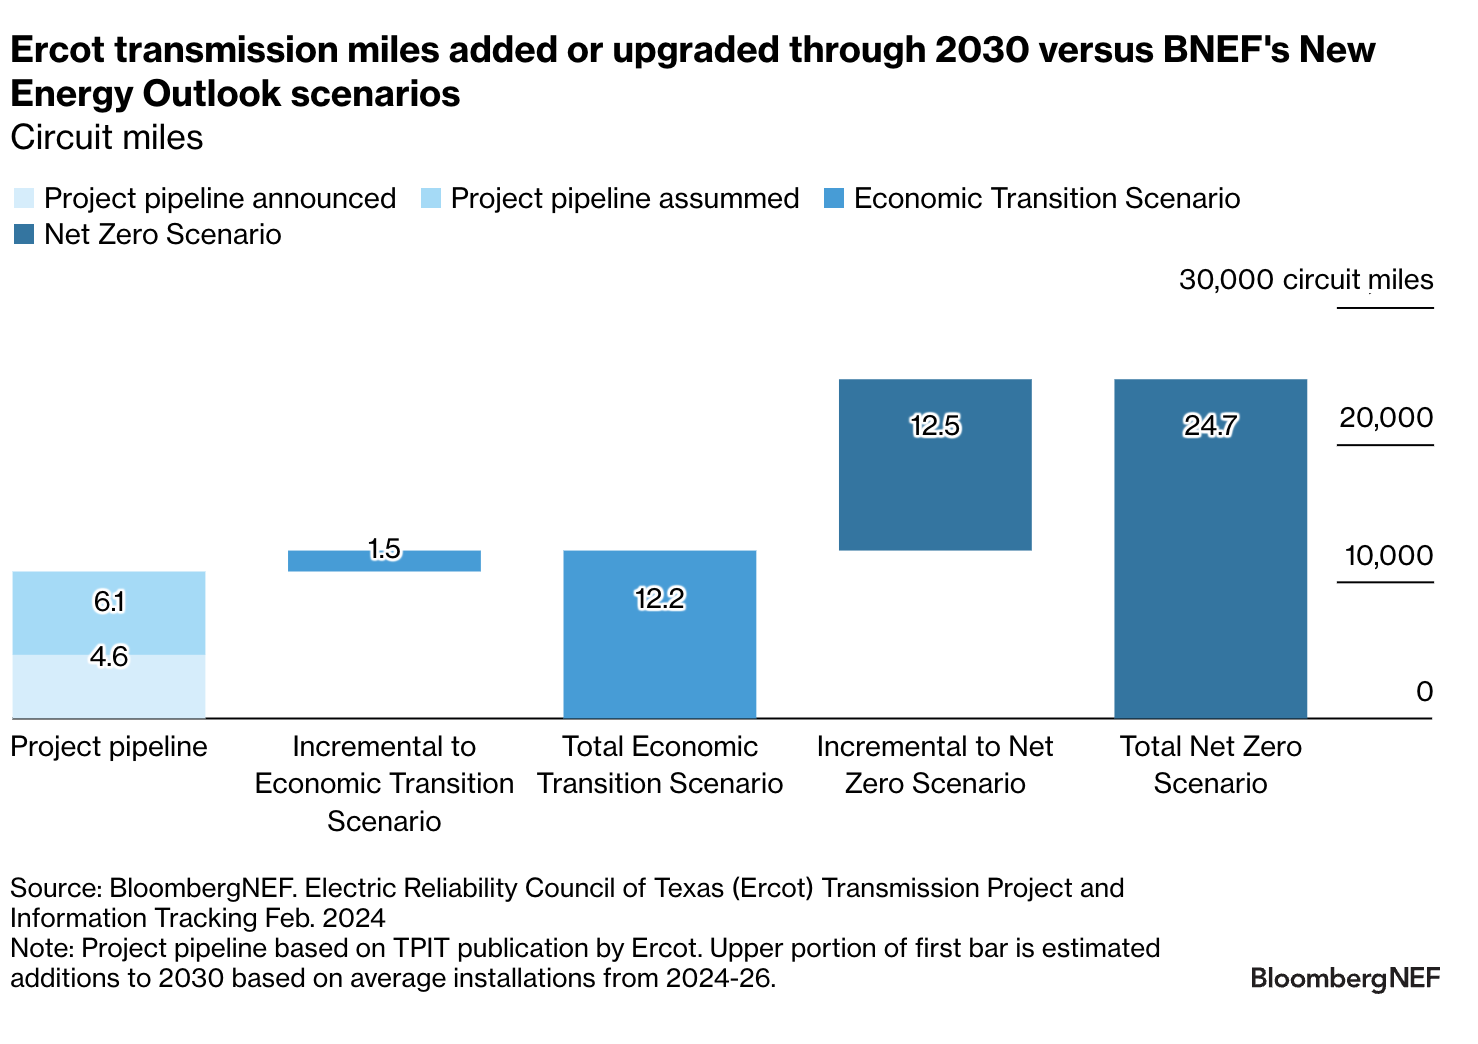 Ercot transmission miles added or upgraded through 2030 versus BNEF's New Energy Outlook scenarios